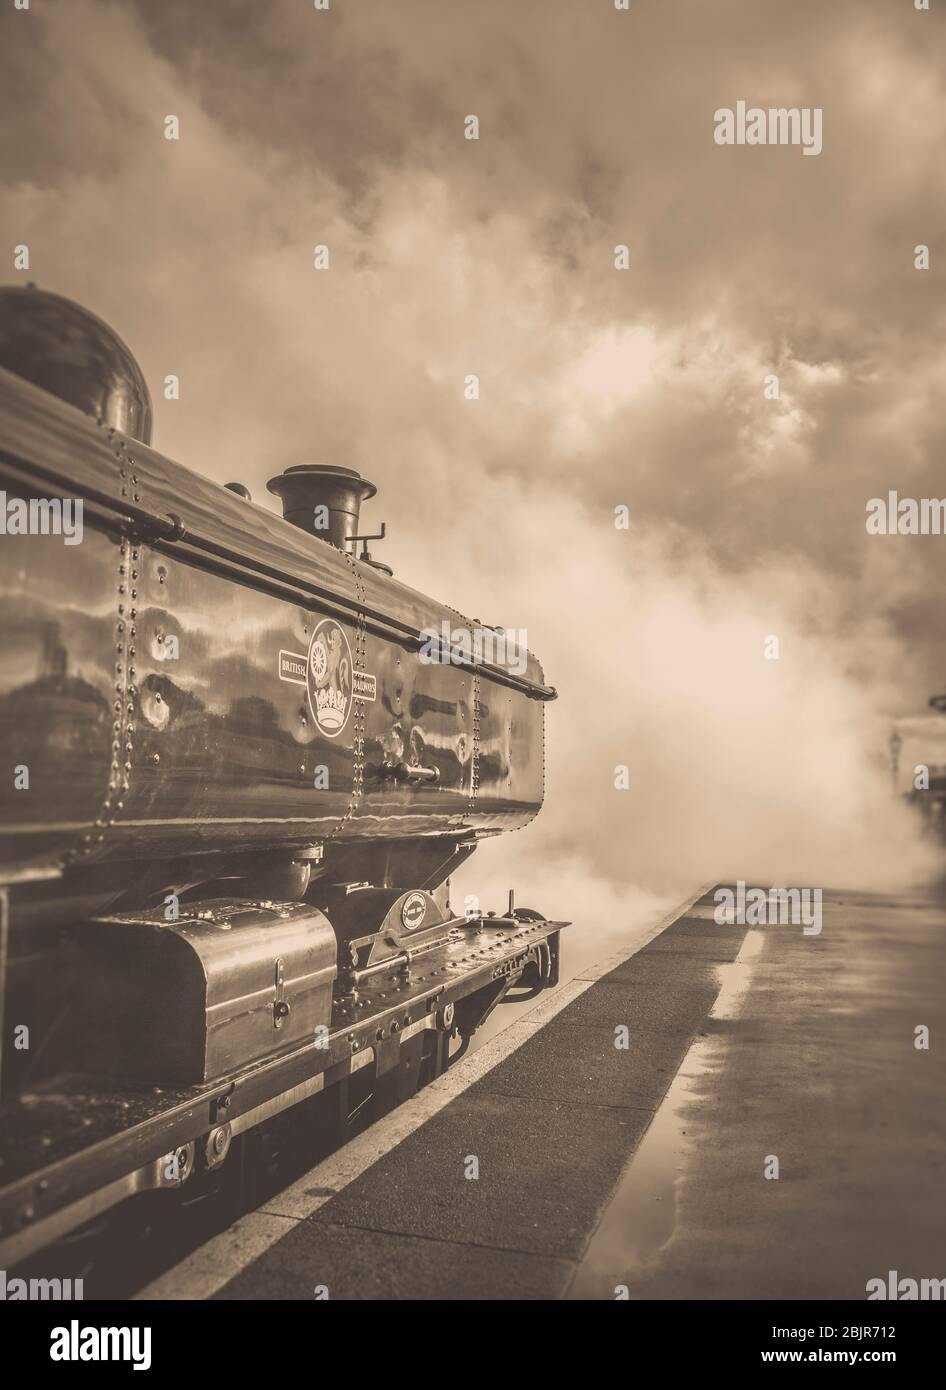 Sepia side view of vintage UK steam train near platform, leaving heritage railway station. Fulll steam ahead for this atmospheric departure photo! Stock Photo